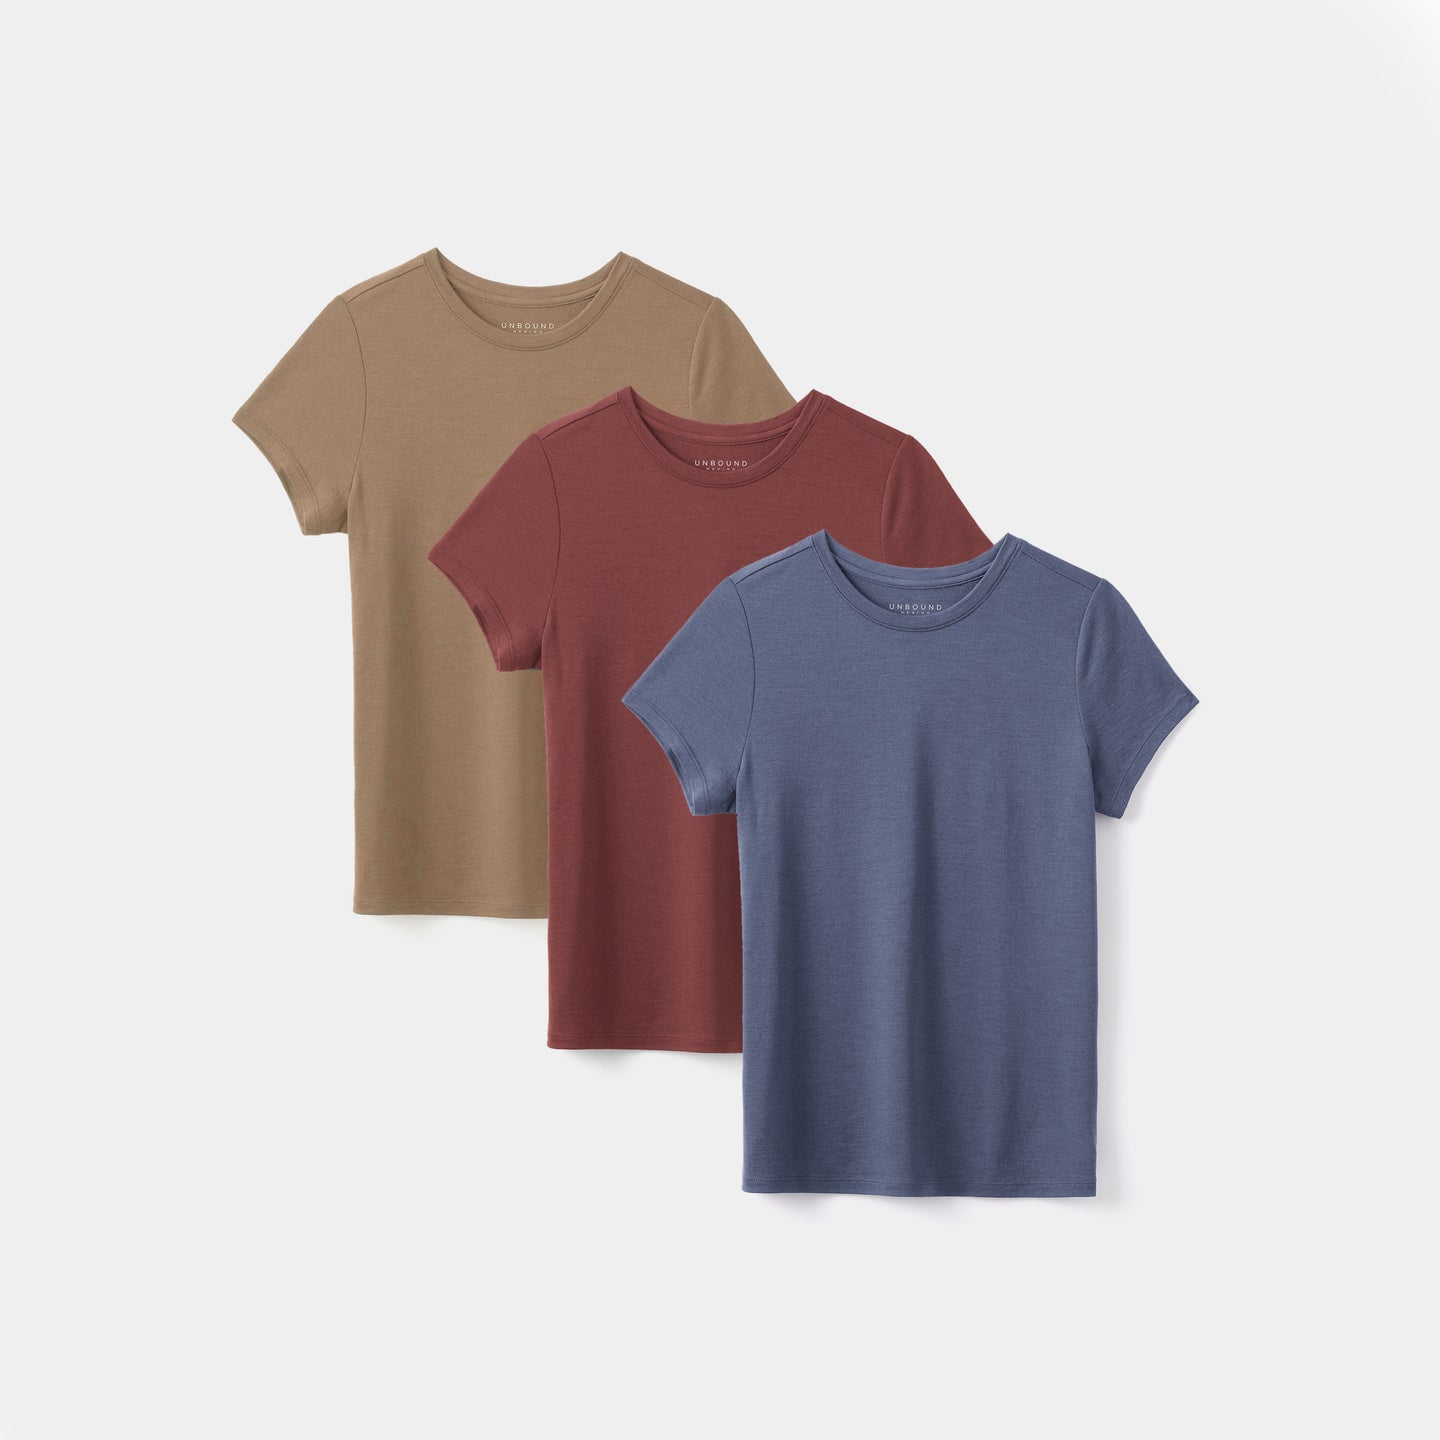 NEW NEW NEW🔥 We now have smartwool products, including t-shirts, hoodies,  and high neck tanks 🤩 Made with fabric that offers the